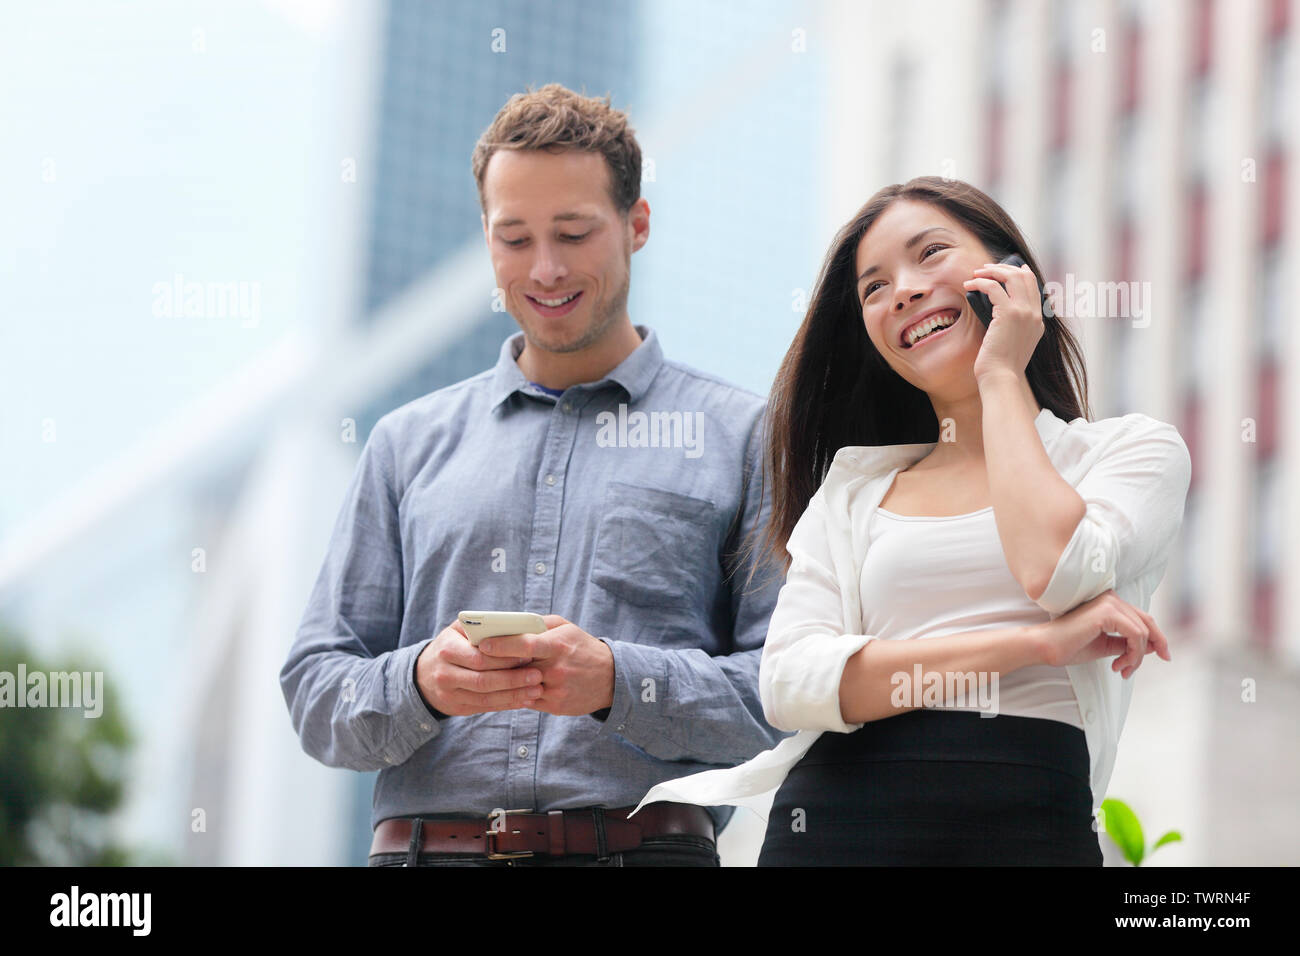 Young urban professionals business people on smartphones in Hong Kong. Businessman using app on smartphone and businesswoman talking having conversation on smart phone in Hong Kong Central. Stock Photo